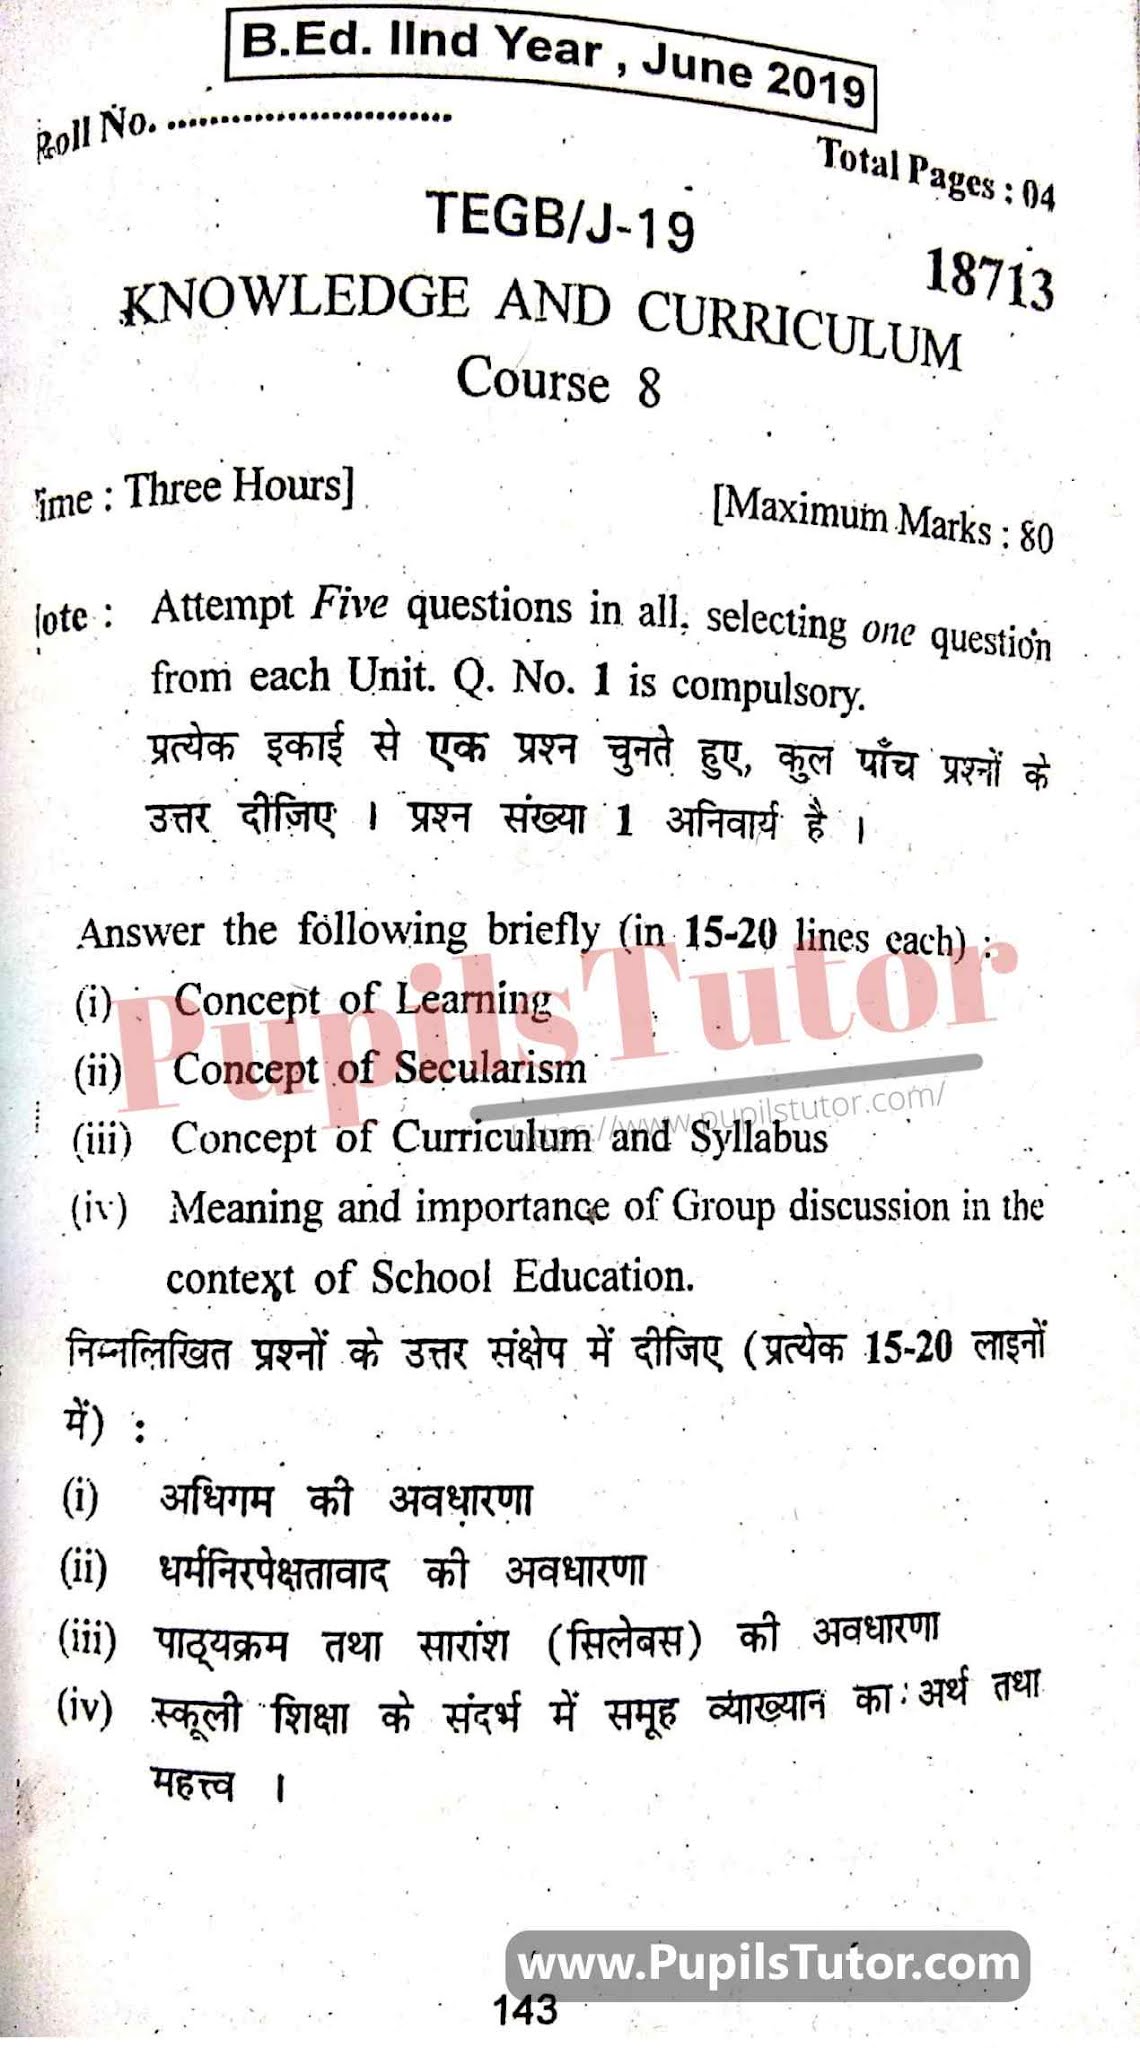 KUK (Kurukshetra University, Haryana) Knowledge And Curriculum Question Paper 2019 For B.Ed 1st And 2nd Year And All The 4 Semesters In English And Hindi Medium Free Download PDF - Page 1 - Pupils Tutor